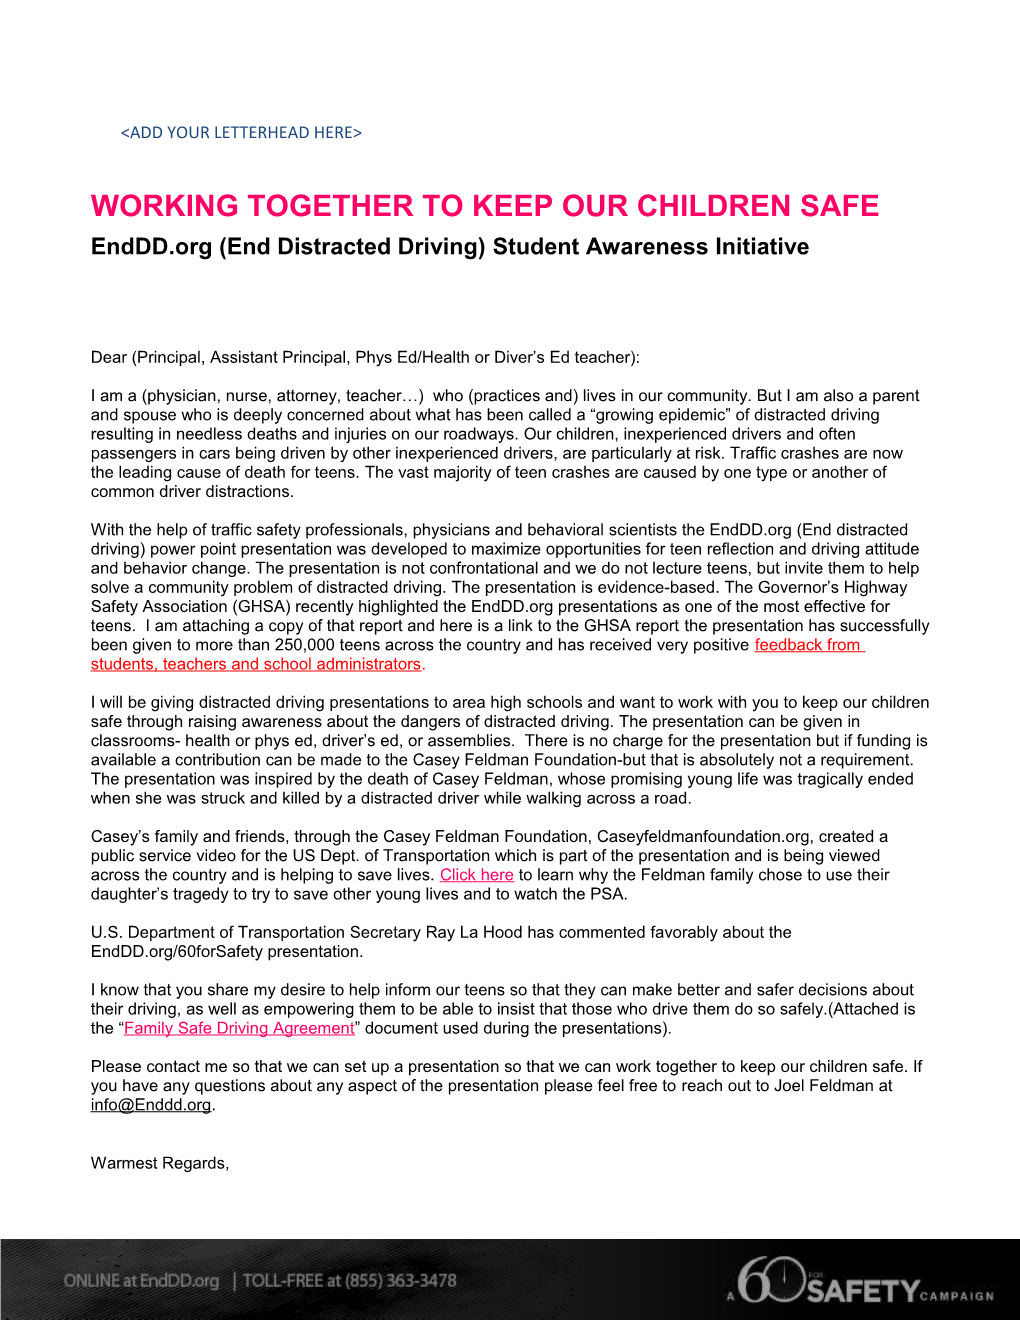 Working Together to Keep Our Children Safe